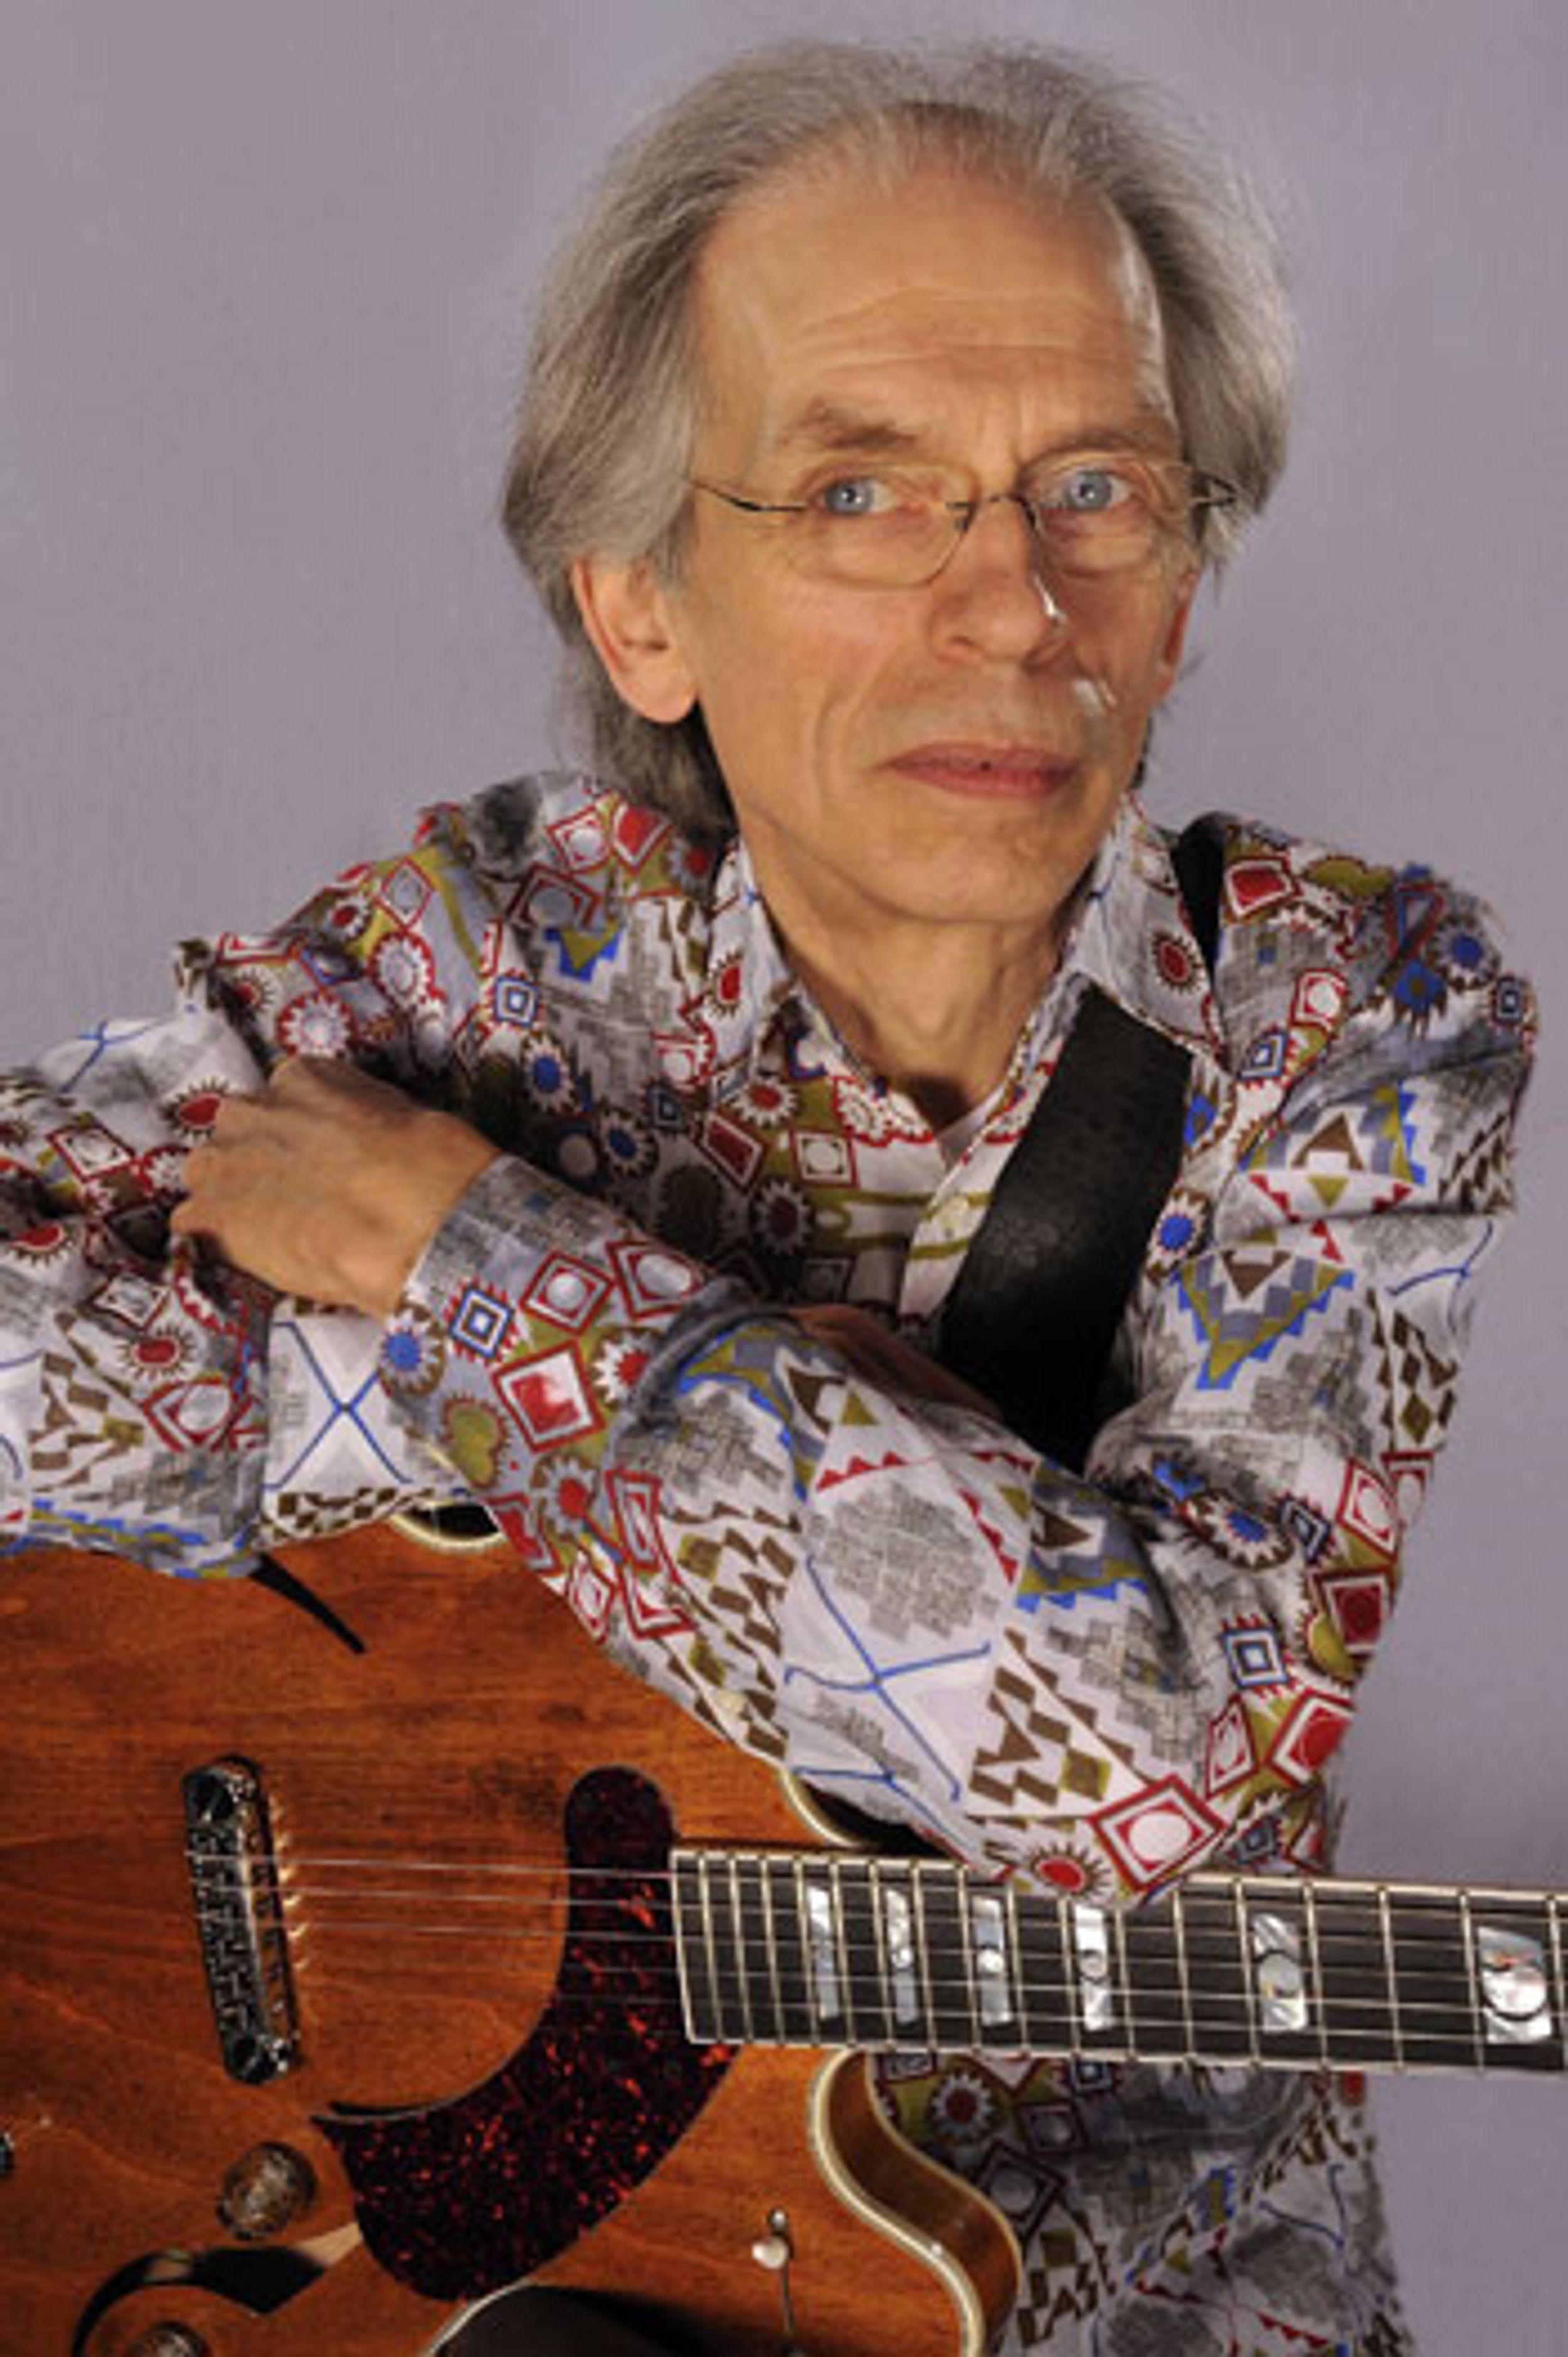 Interview: Steve Howe on Asia's "Omega," Touring With Yes, and the Steve Howe Trio